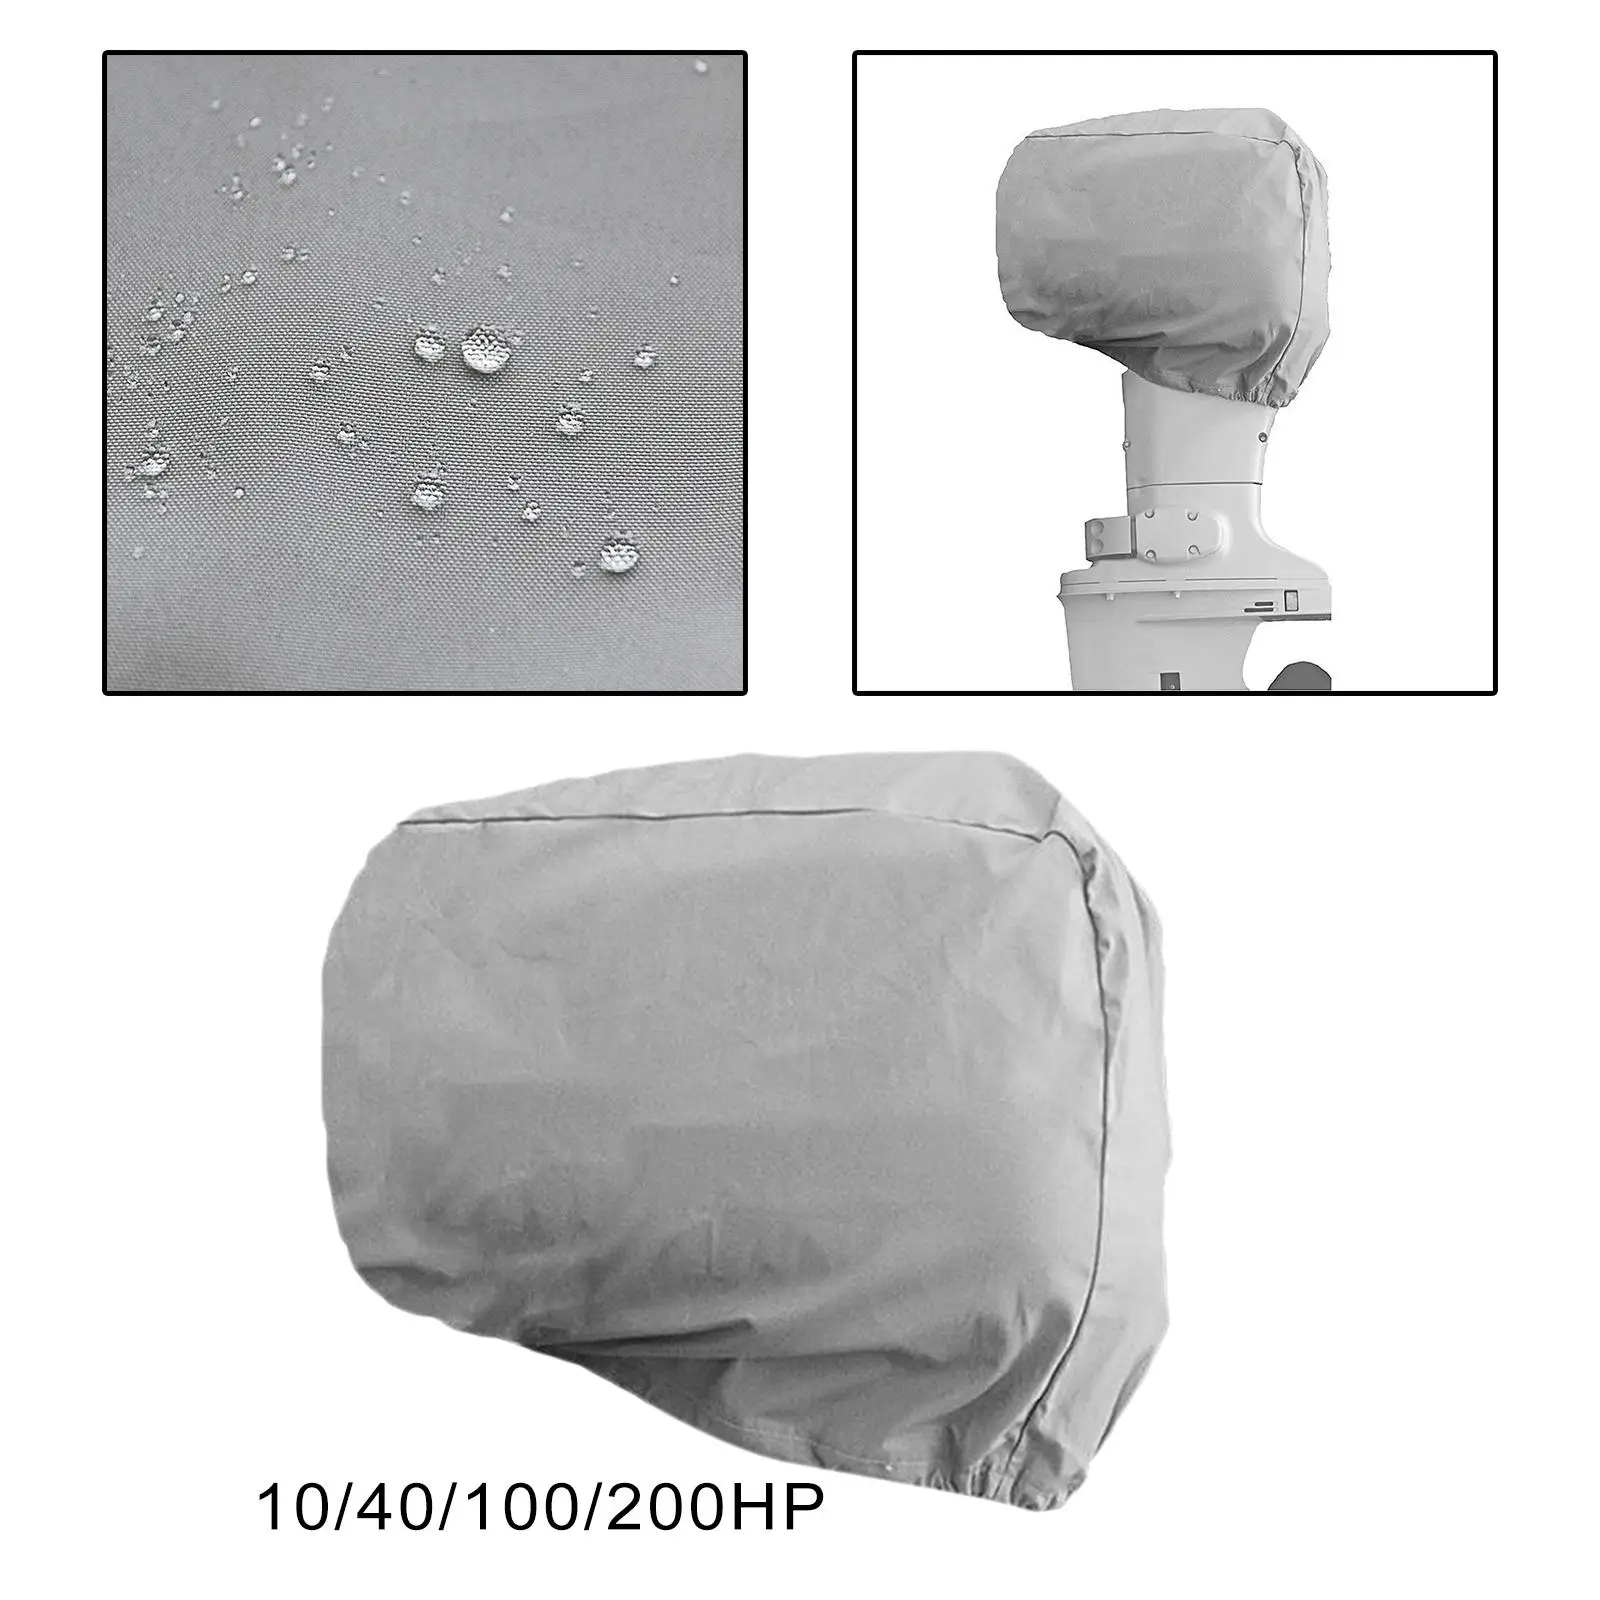 Boat Hood Covers Waterproof Portable Tear Resistant Outboard Motor Cover for Sea